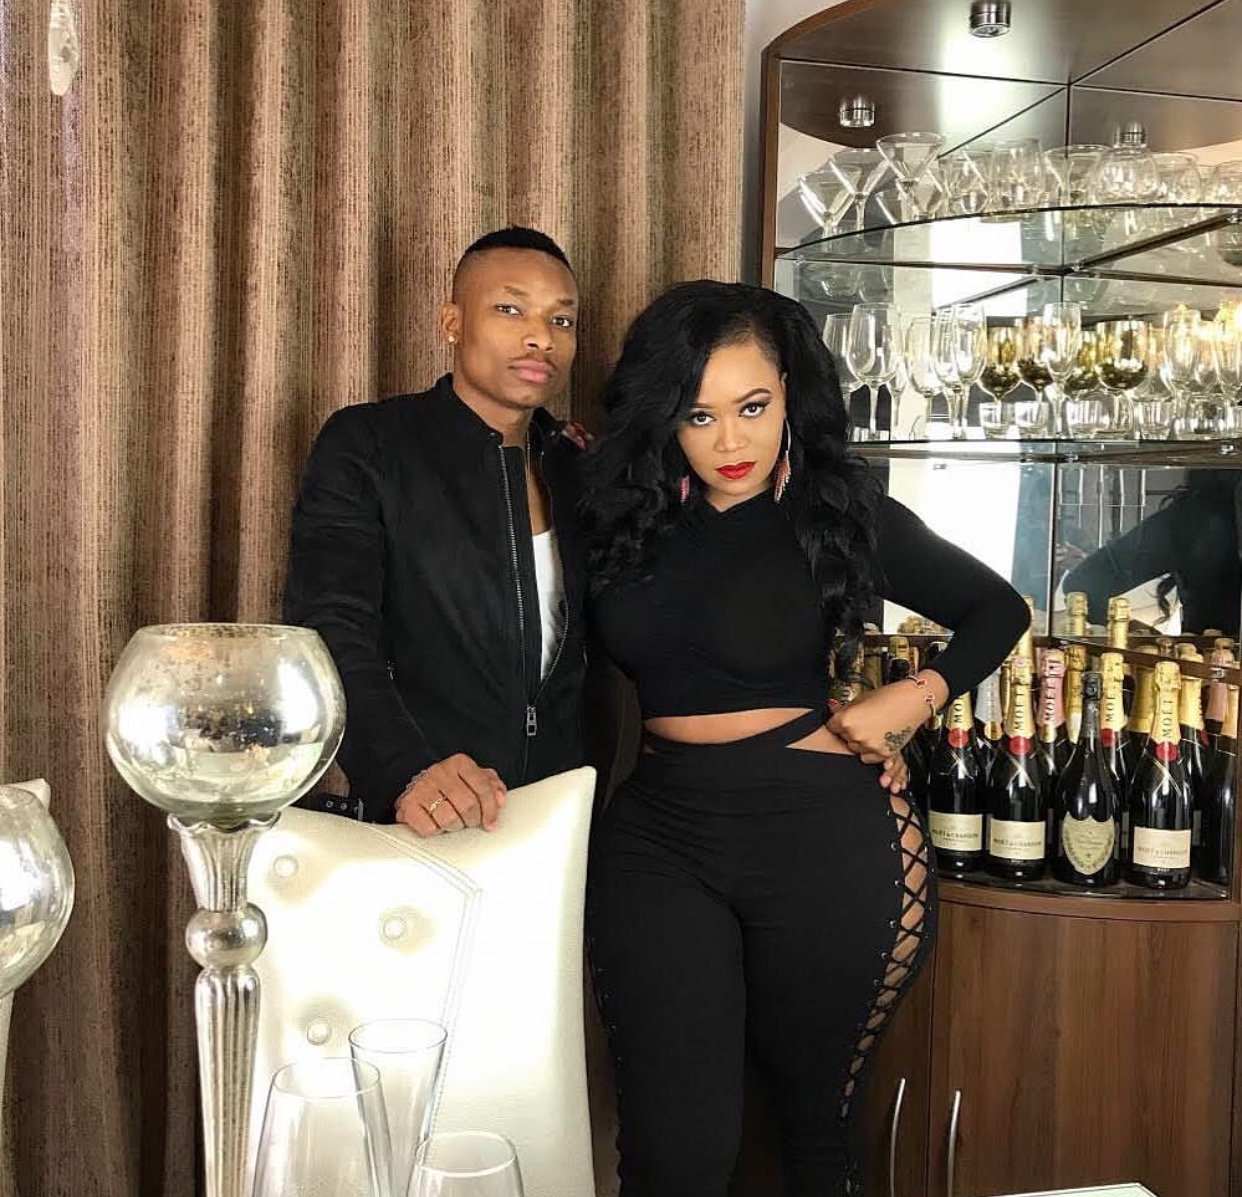 Otile Brown sheds some light on the type of relationship he has with Vera Sidika